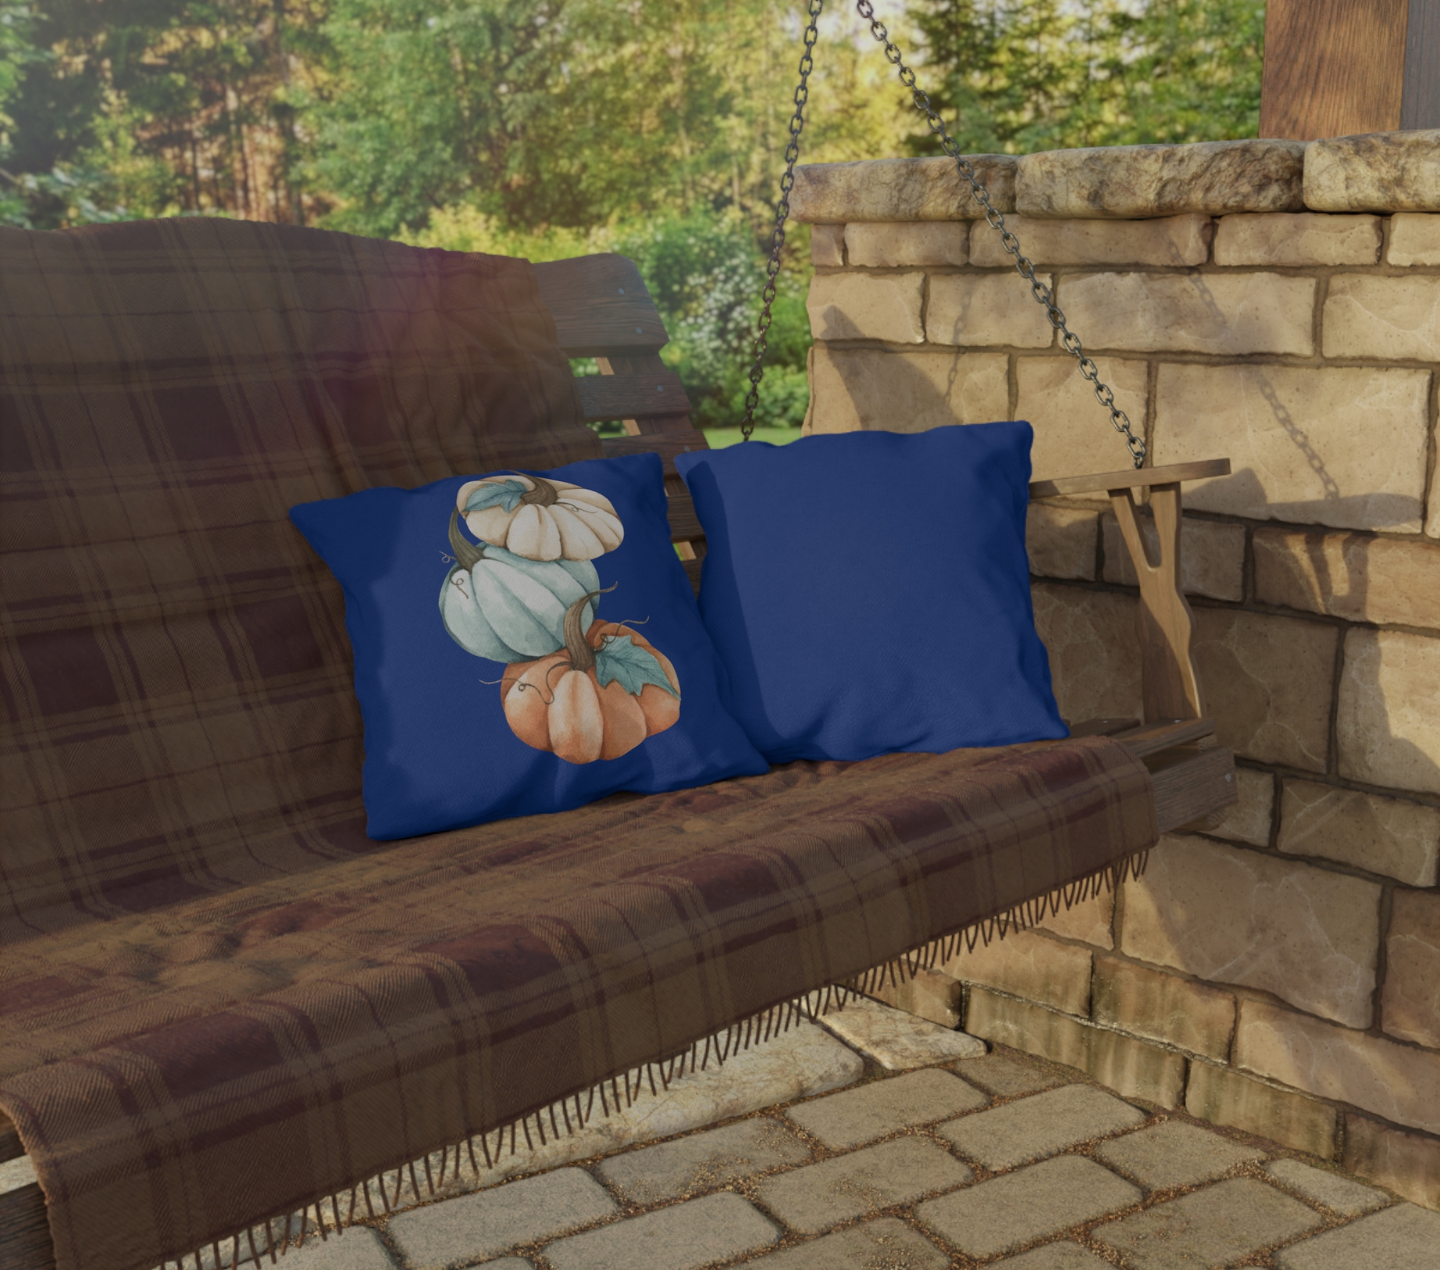 Get trendy with Fall-themed Outdoor Pillows - Home Decor available at Good Gift Company. Grab yours for $14 today!